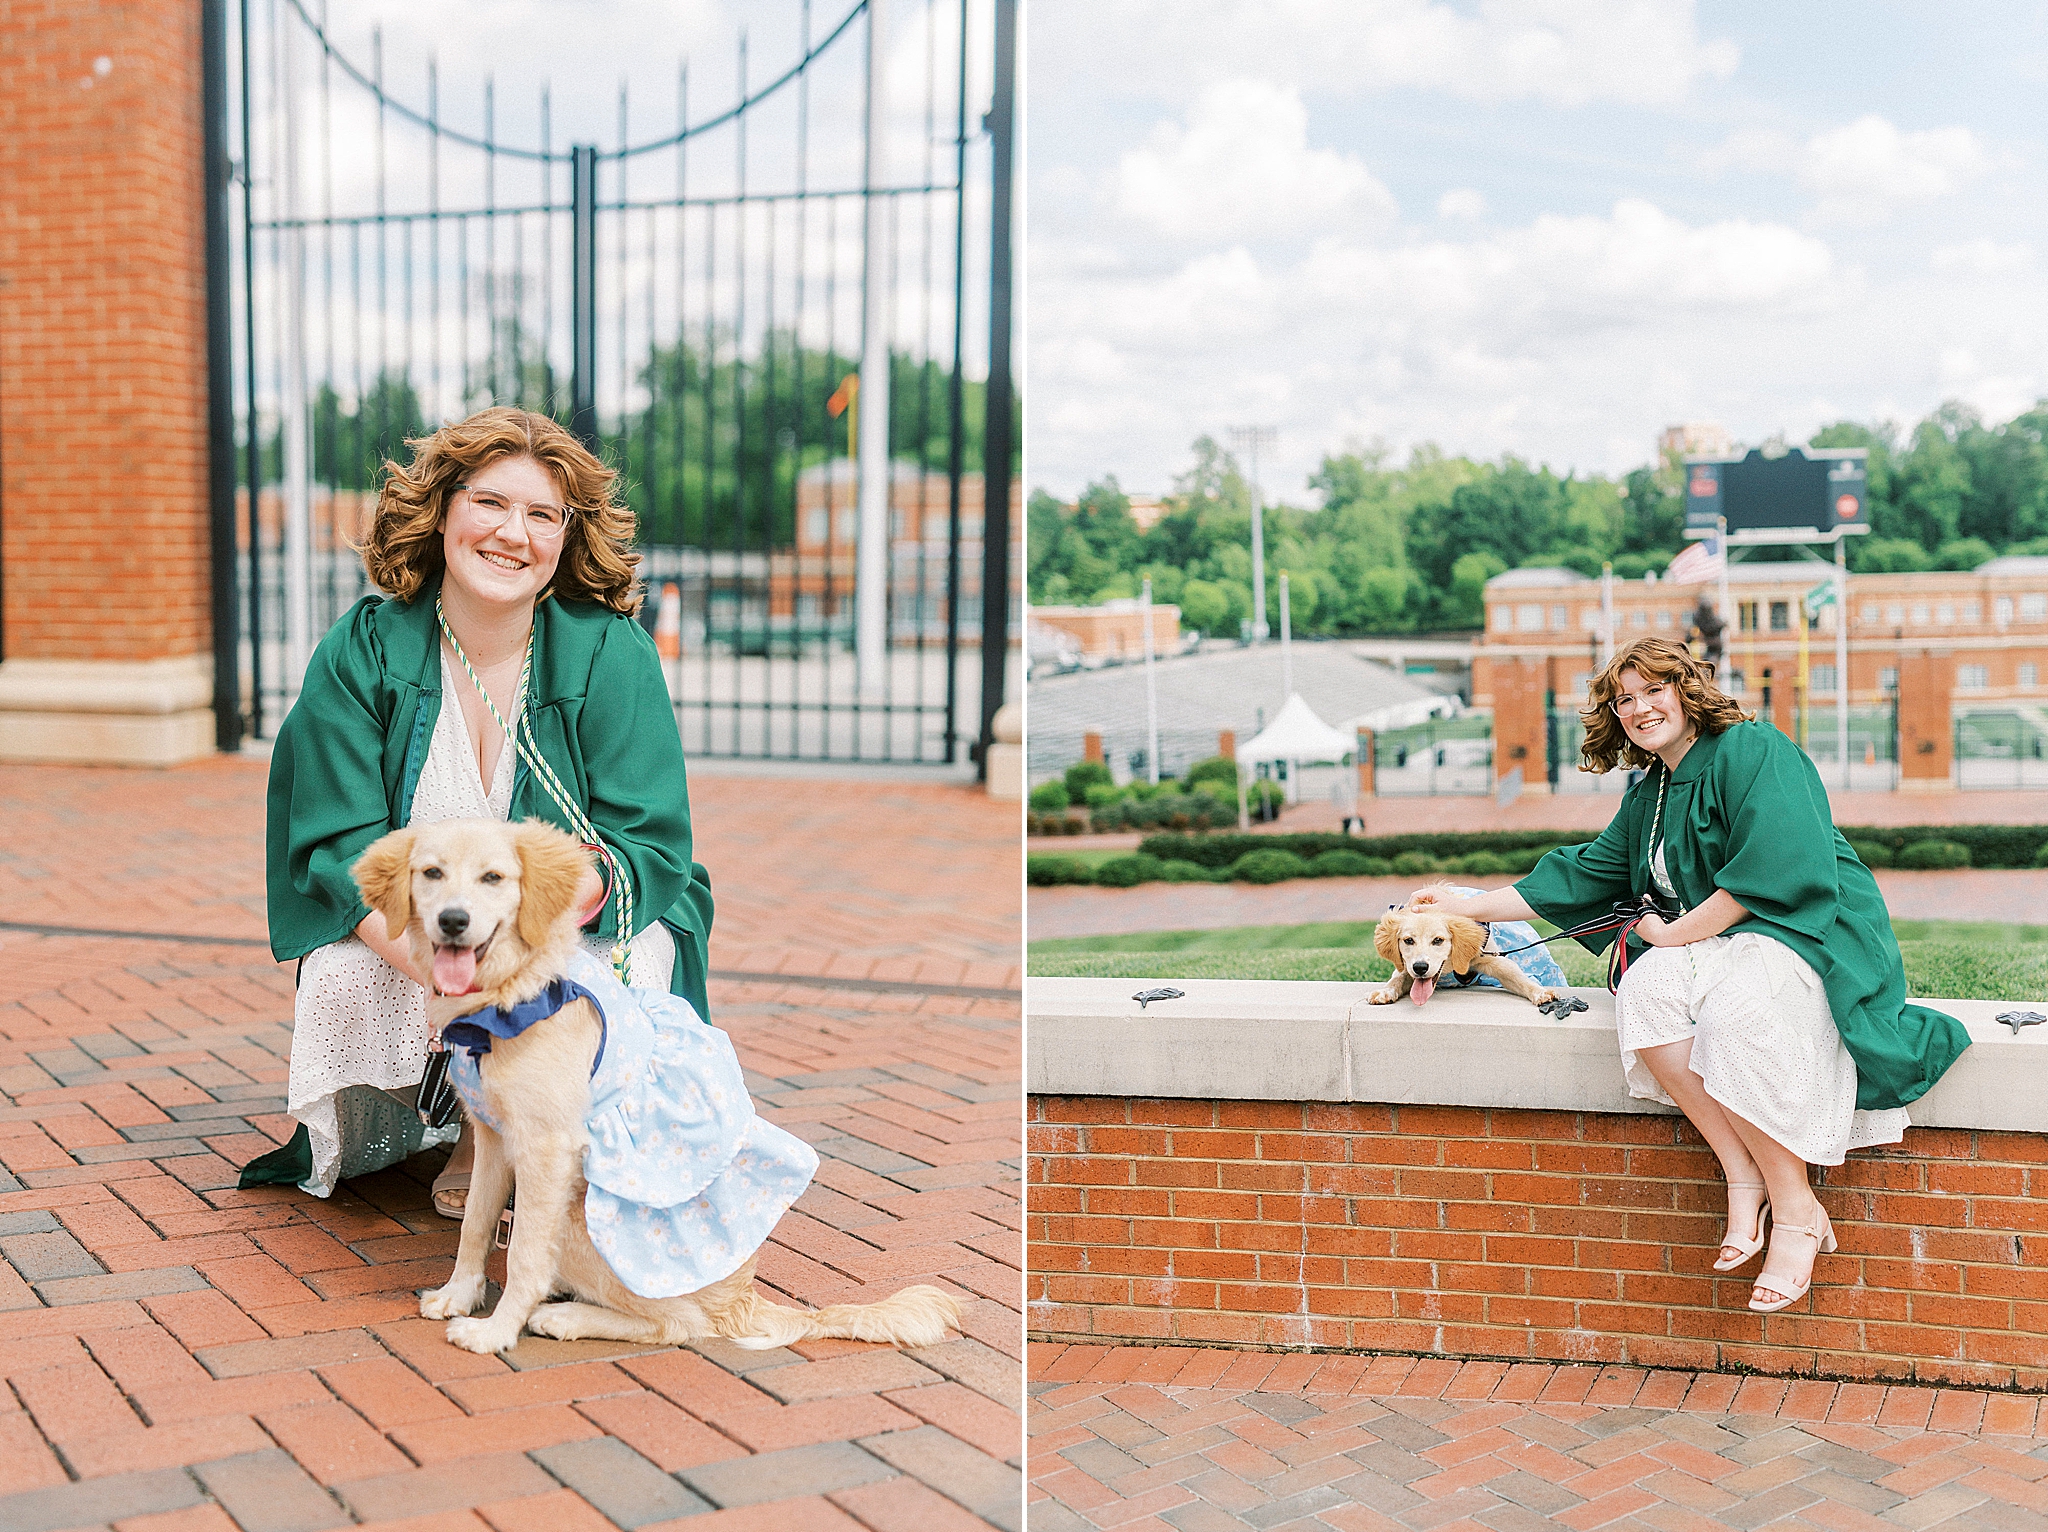 graduate poses with dog by UNCC football field